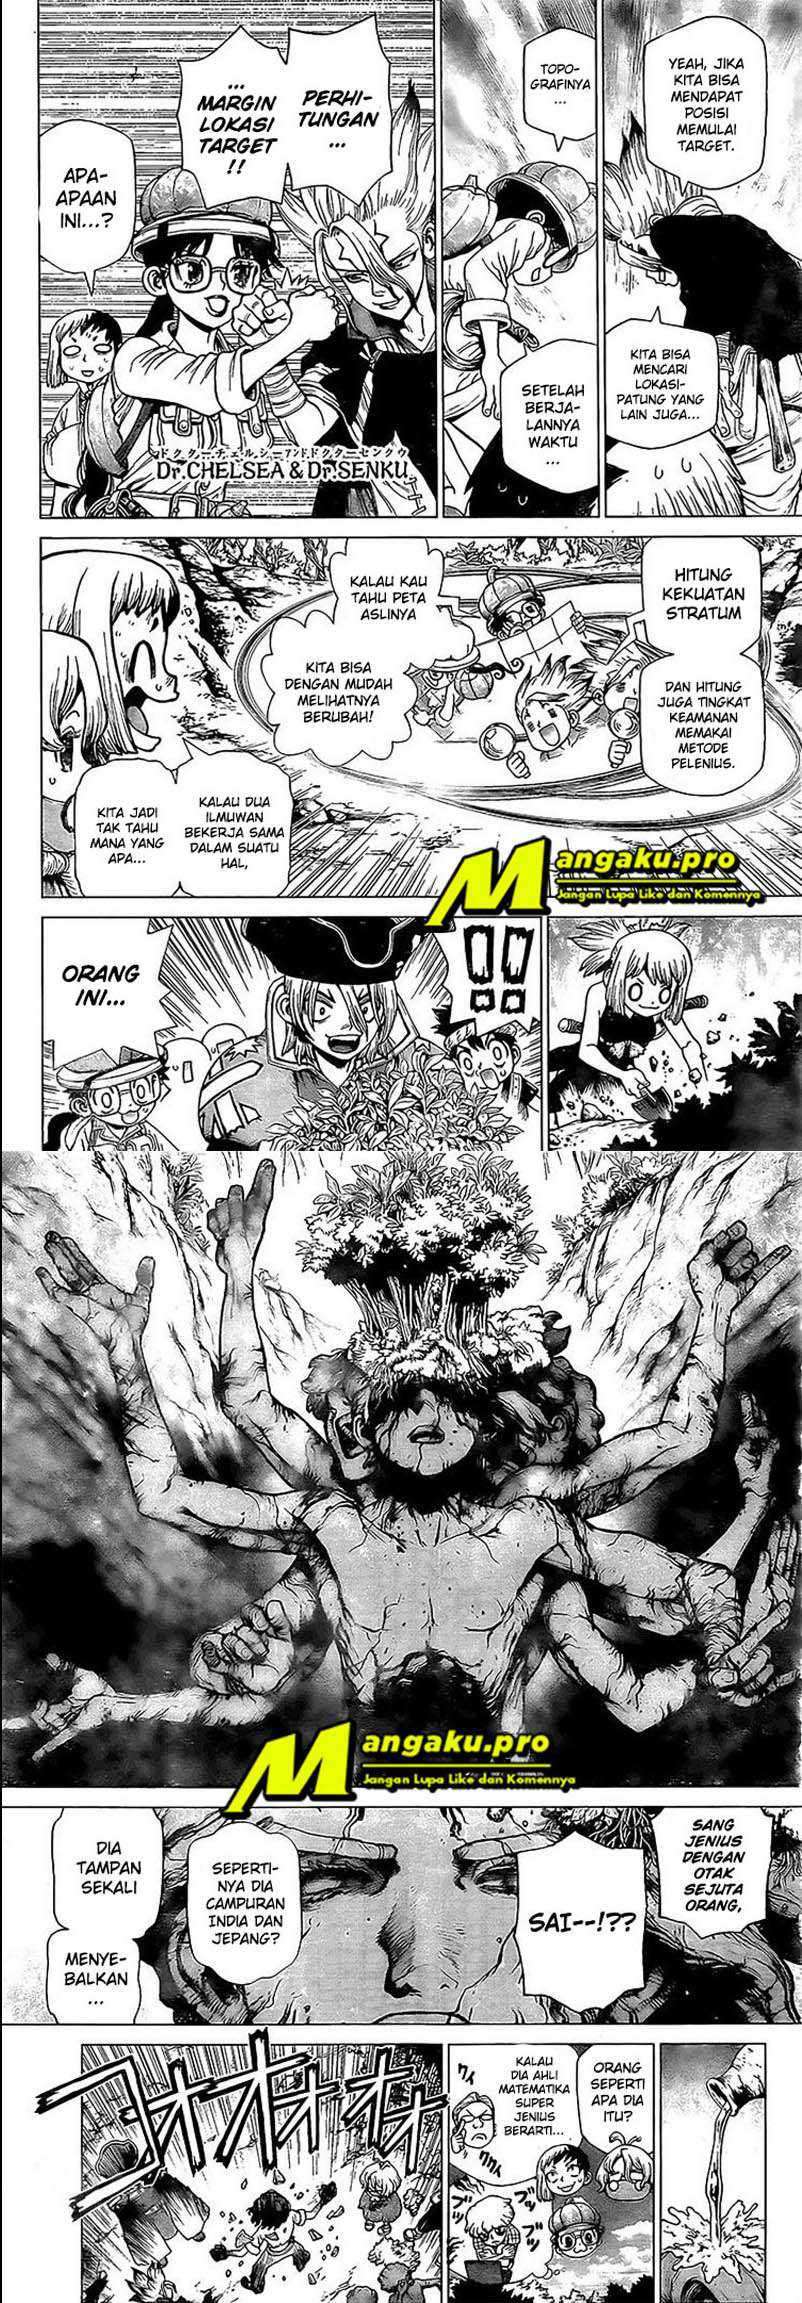 Dr Stone Chapter 204